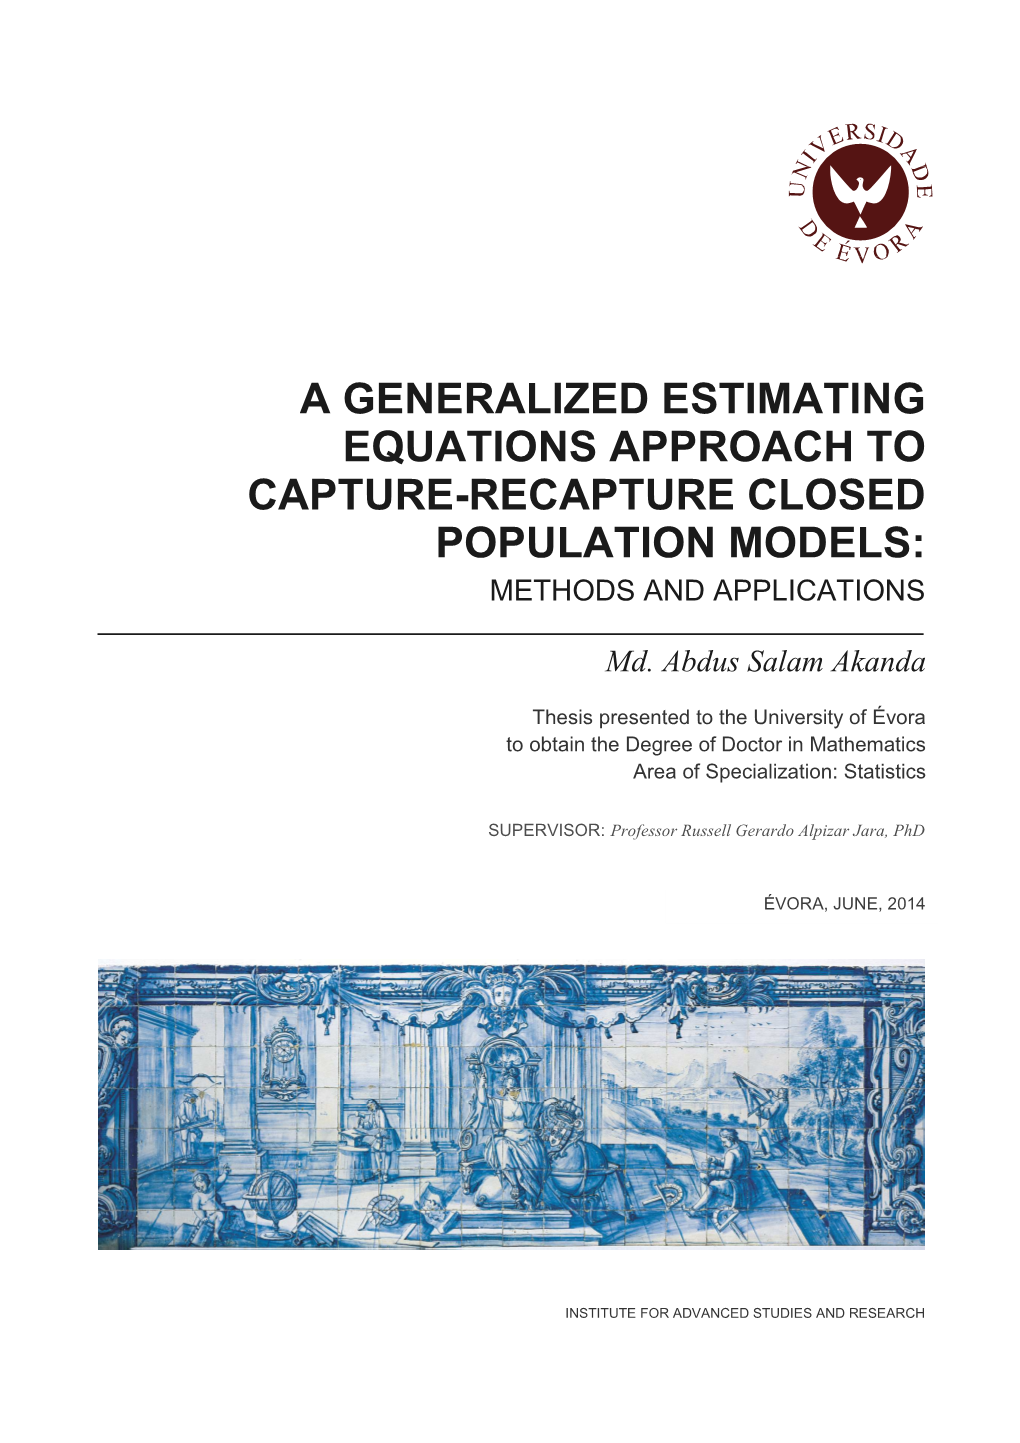 A Generalized Estimating Equations Approach to Capture-Recapture Closed Population Models: Methods and Applications